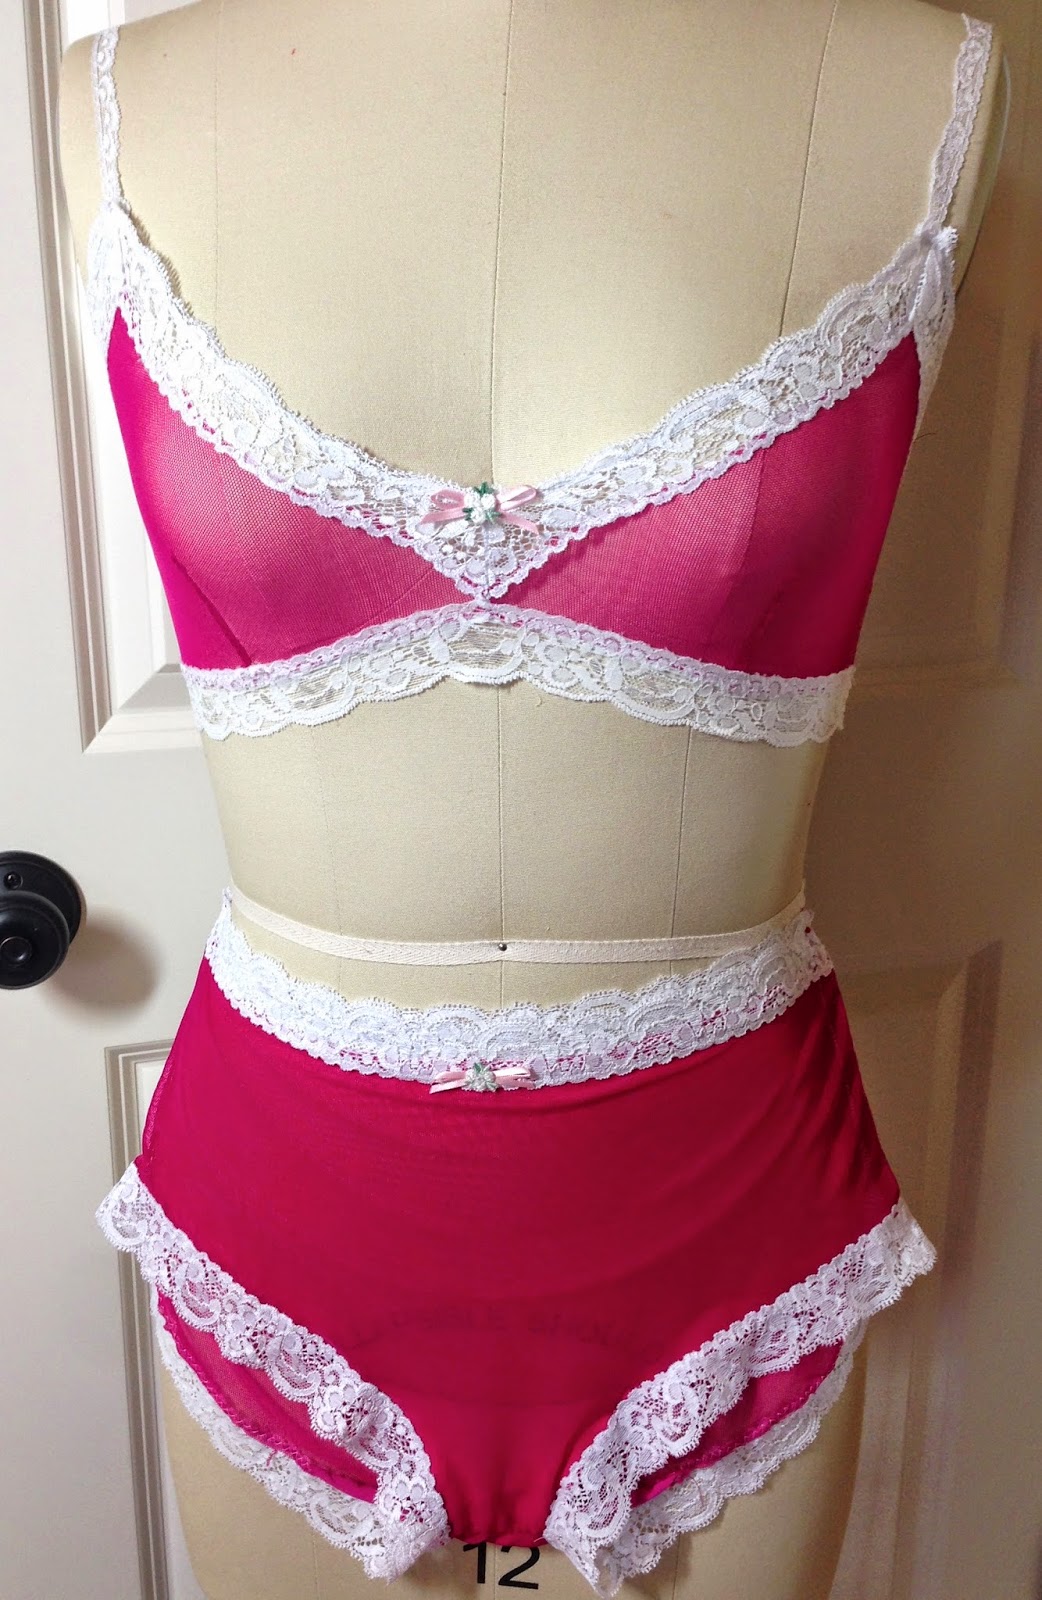 Gertie's New Blog for Better Sewing: Make a Bralette Using